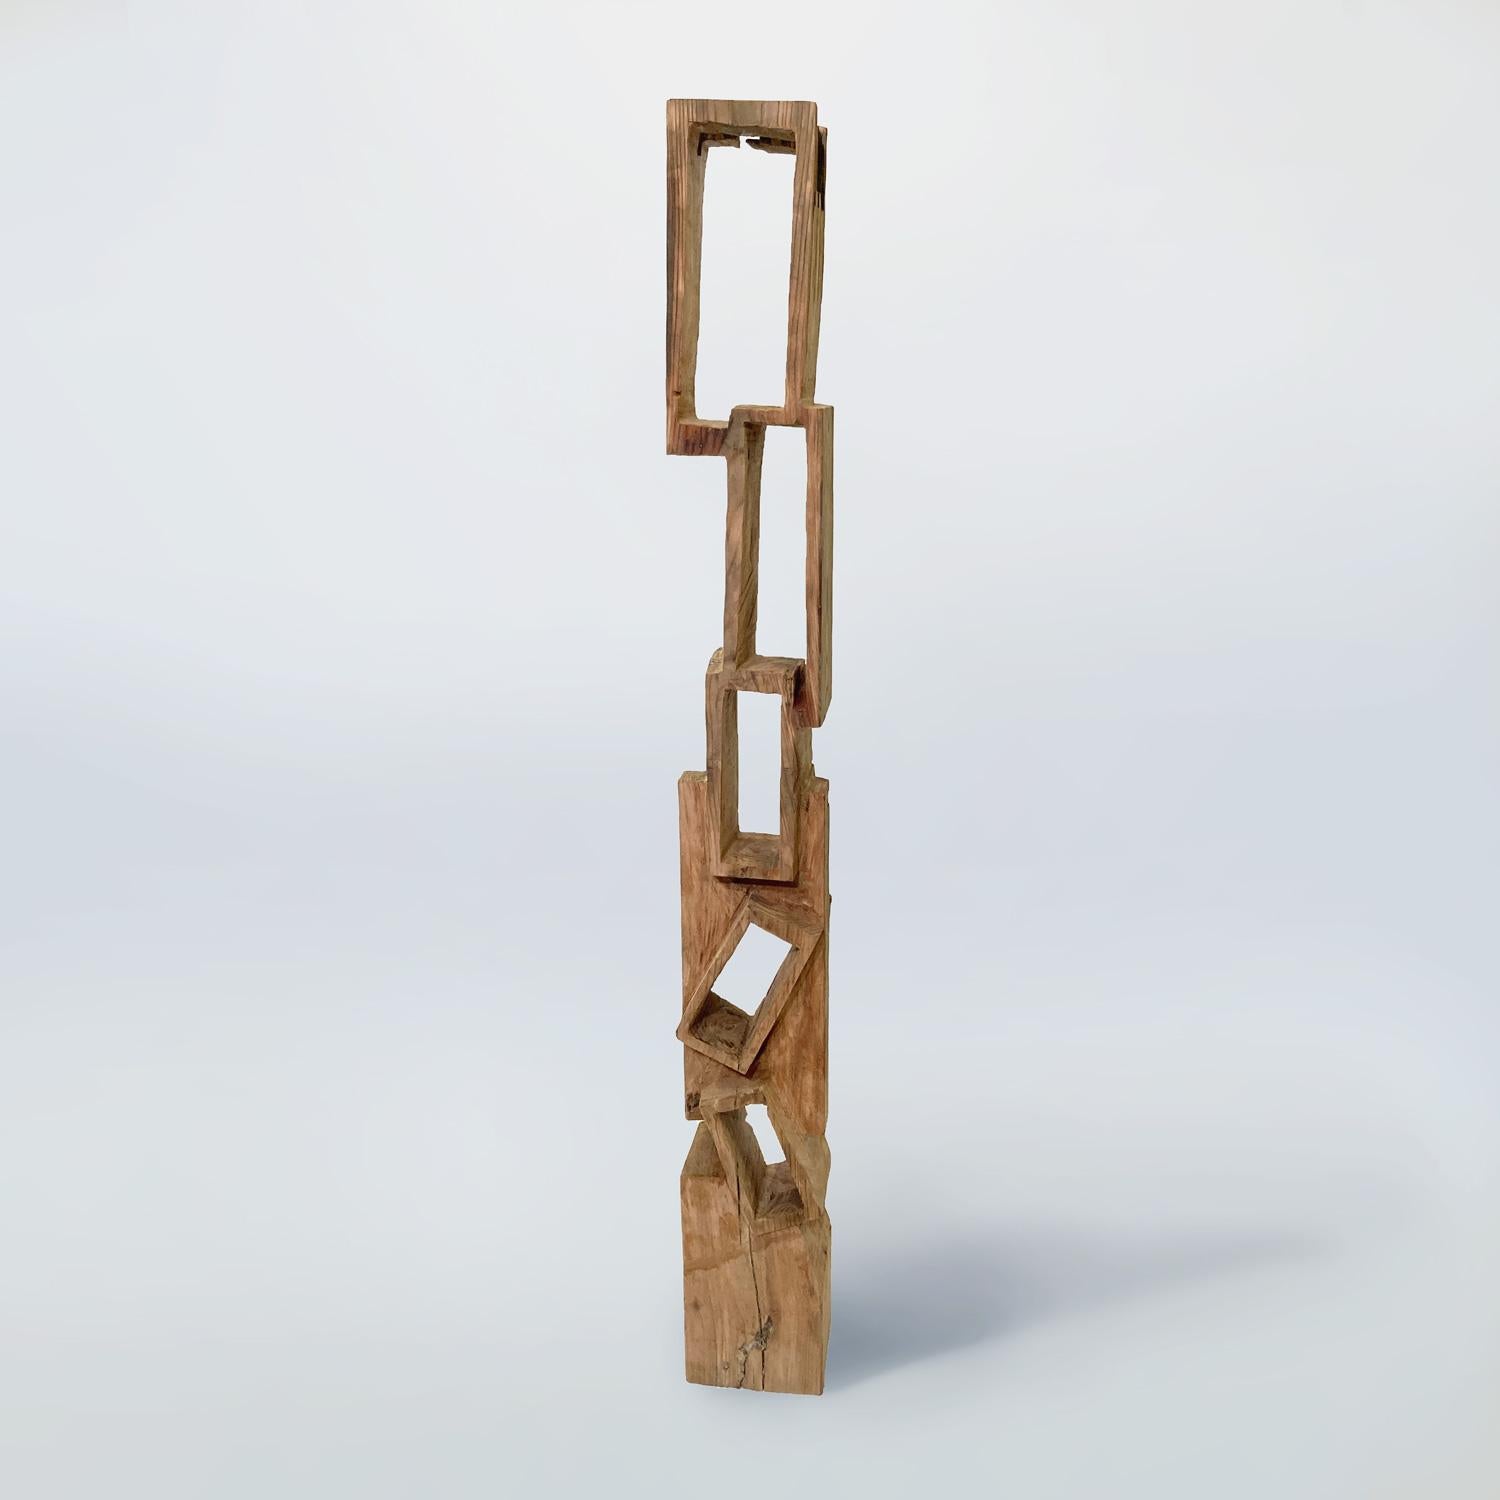 Contemporary Hiroyuki Nishimura Abstract Sculpture Masouleh Tower02 Tribal Style Bookcase For Sale